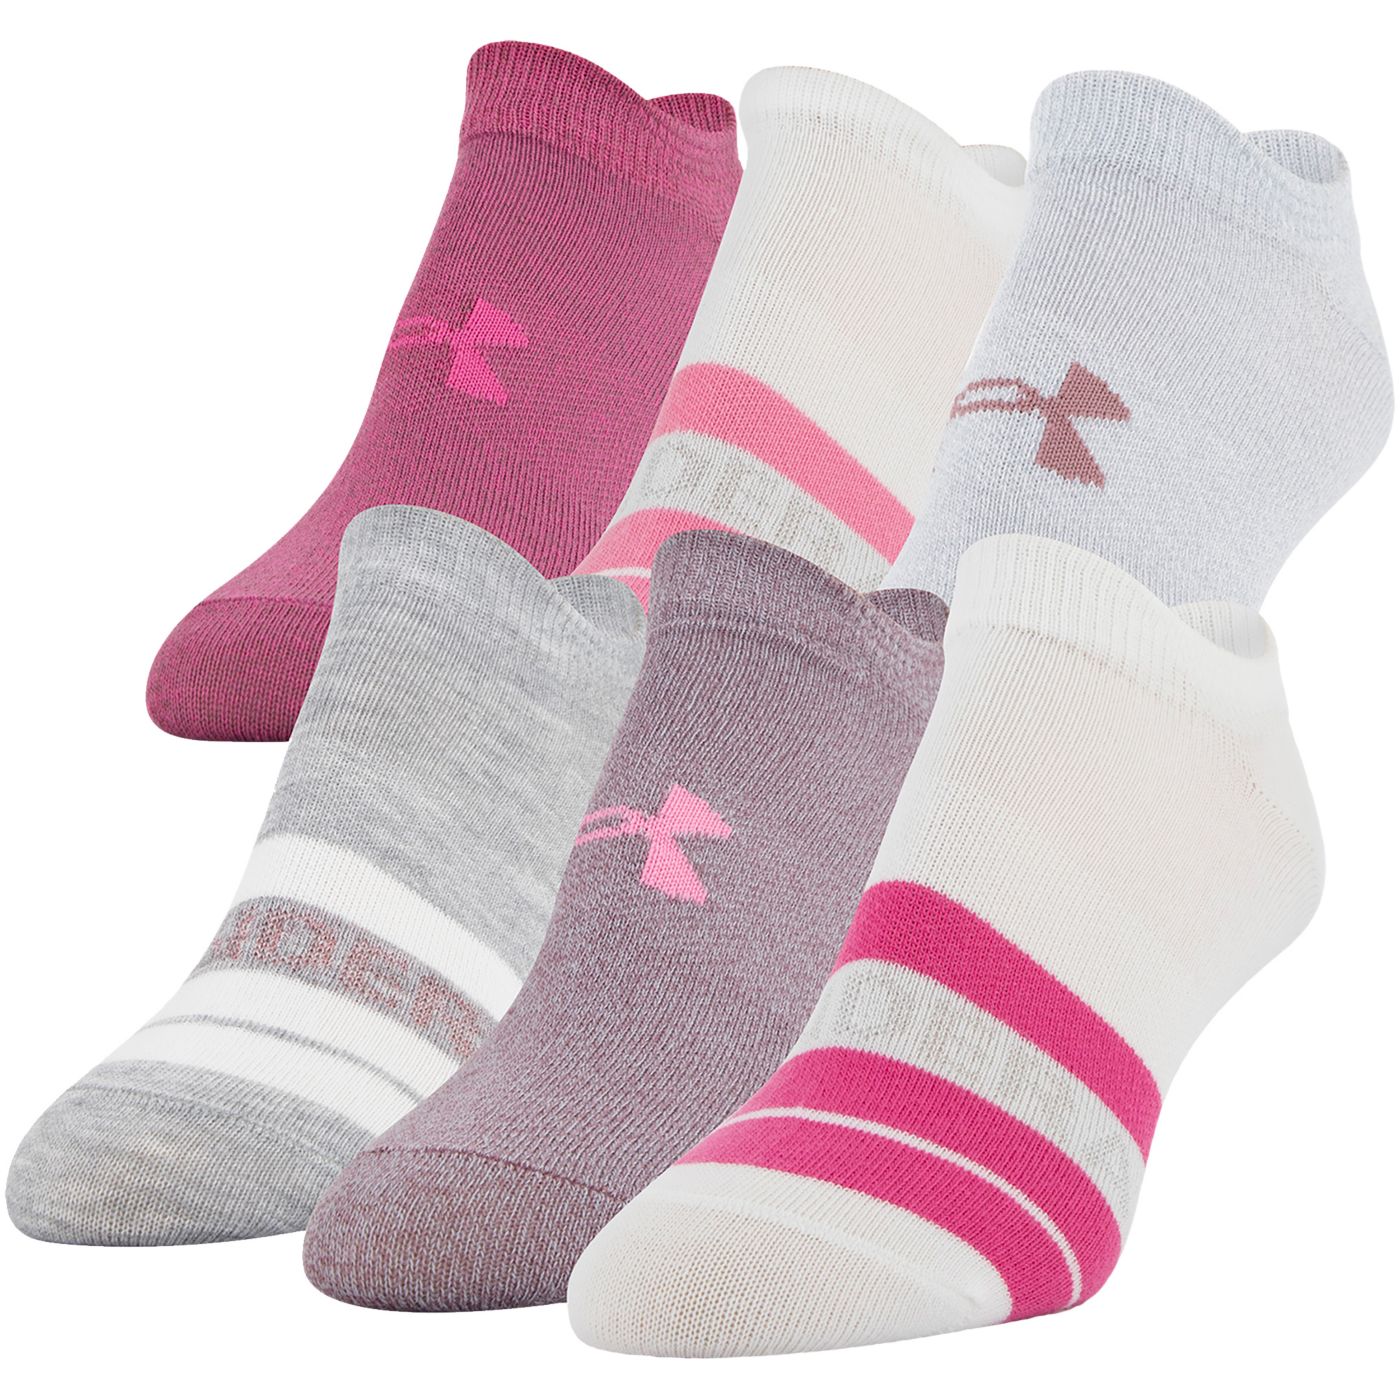 Under Armour Women's Essential 2.0 No Show Socks - 6 Pack | DICK'S ...